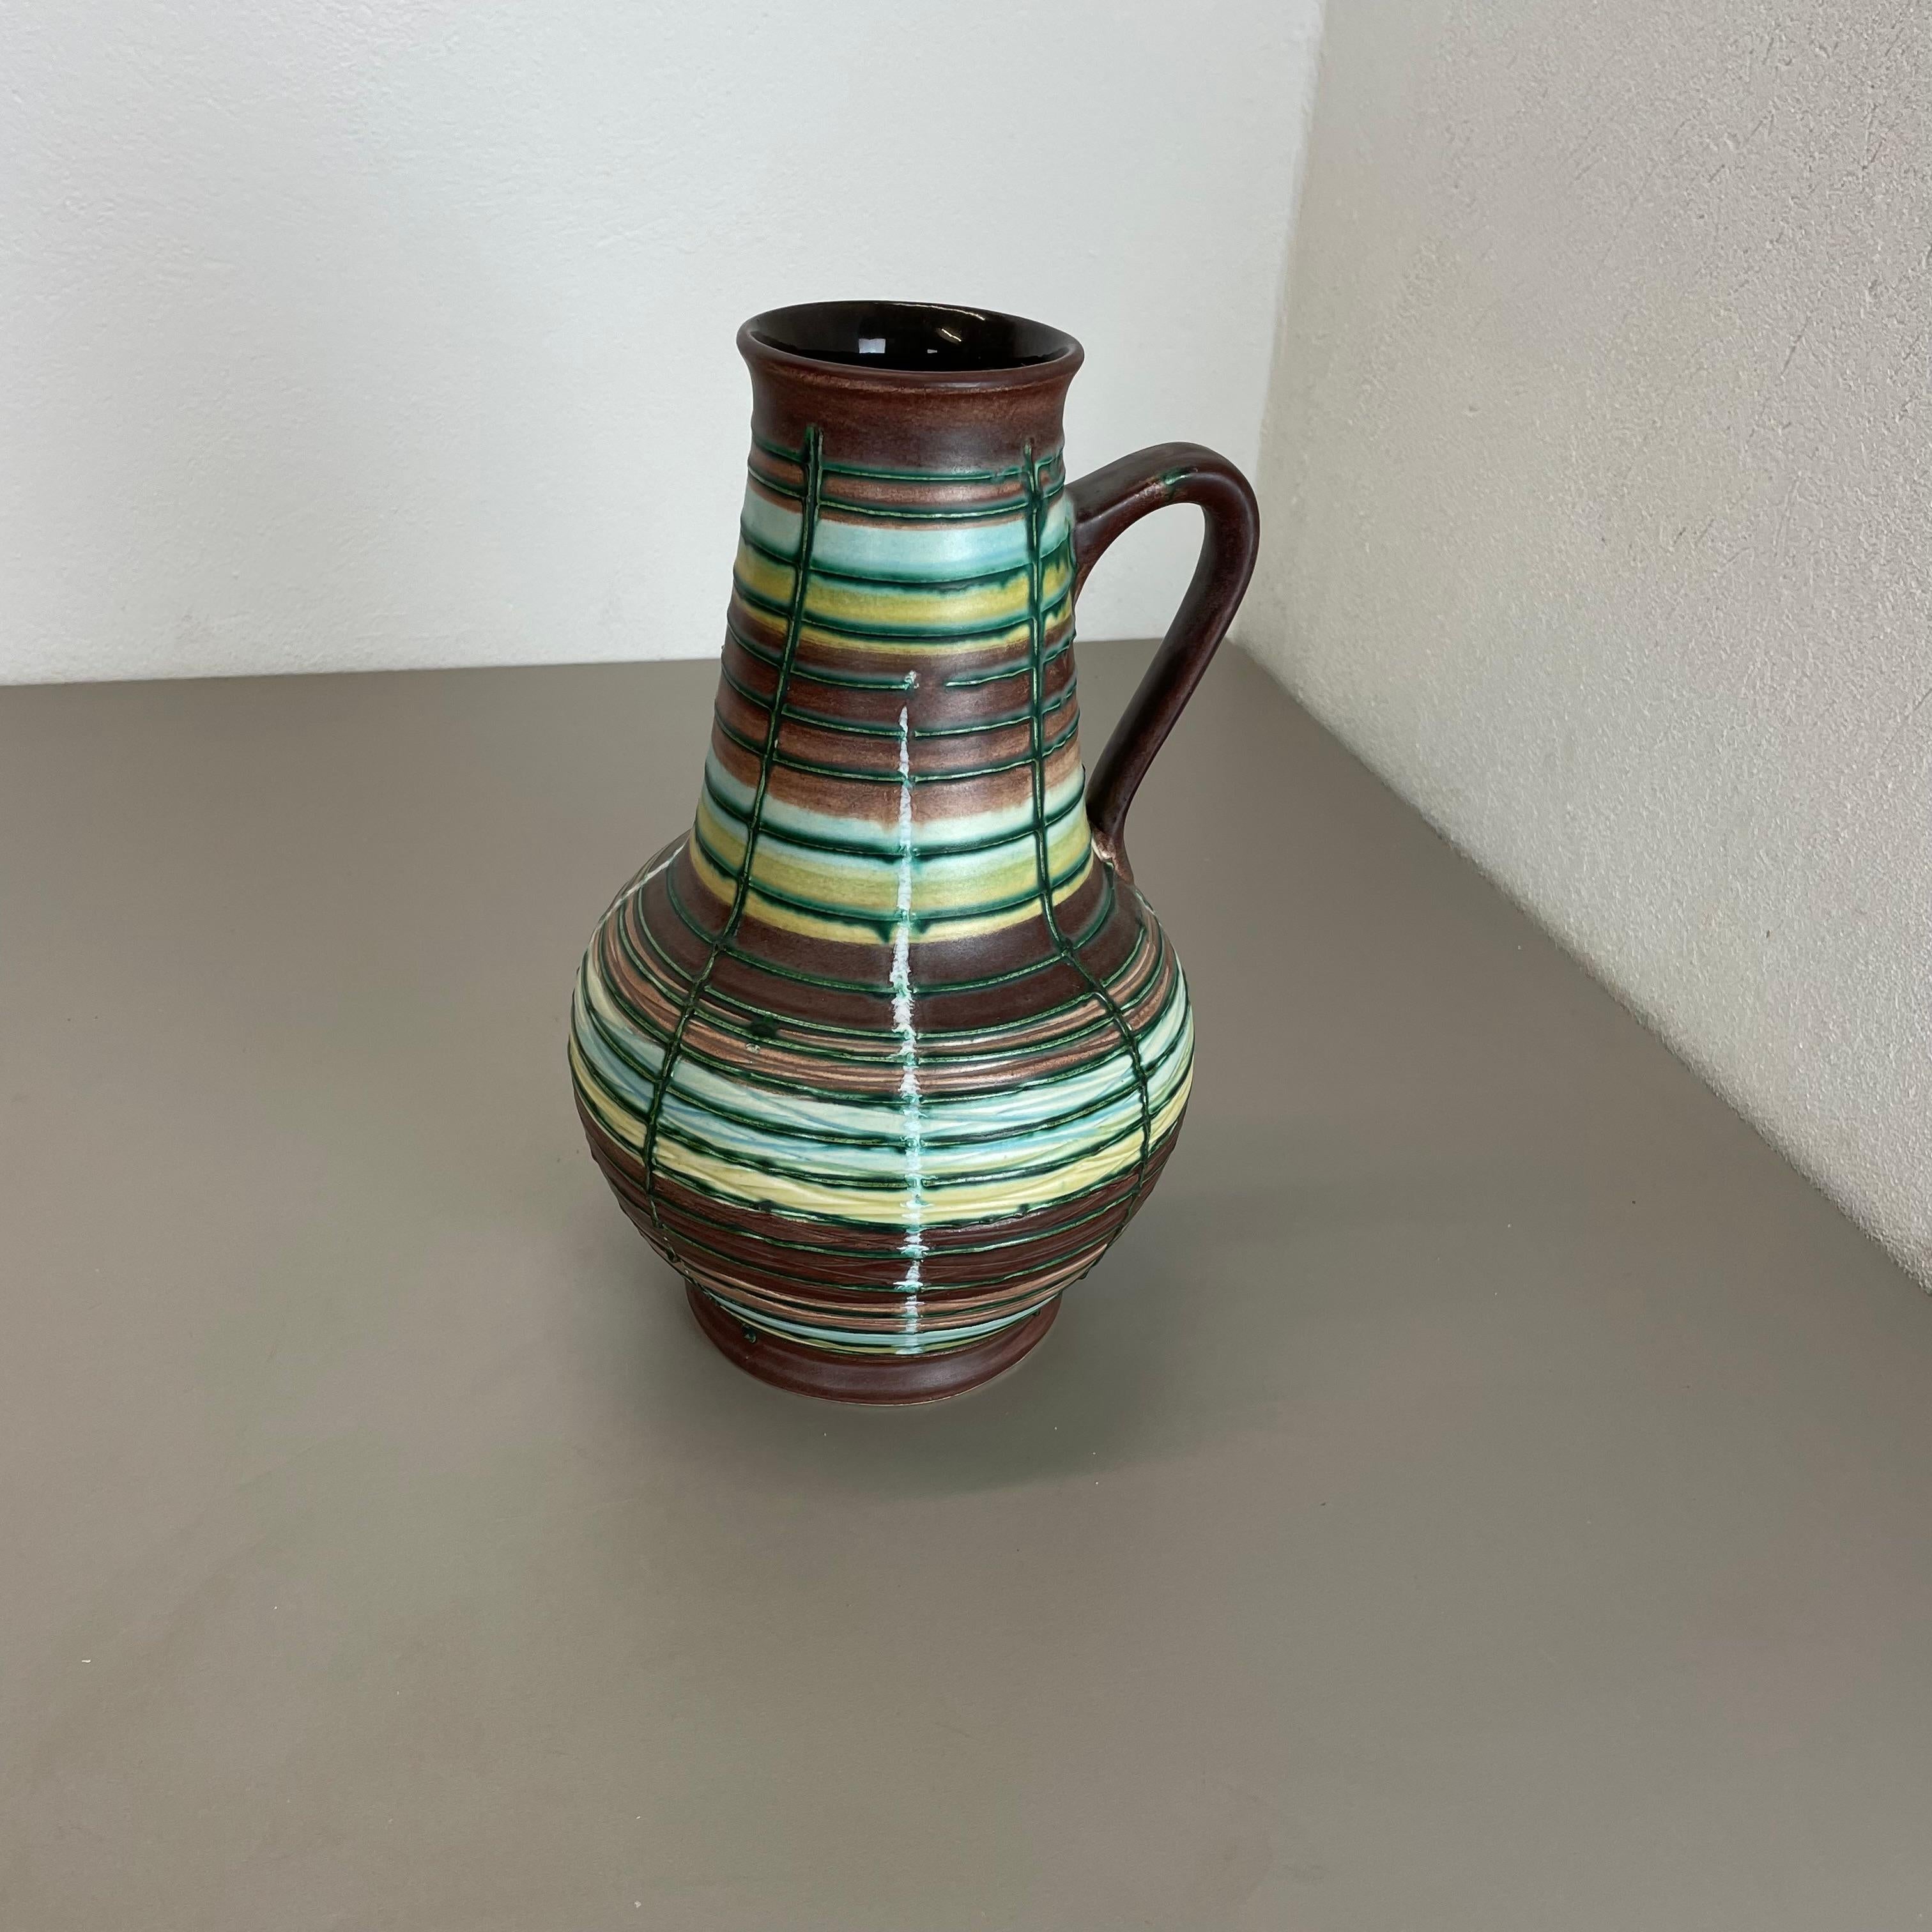 Super Colorful 31cm Fat Lava Pottery Vase by Bay Ceramics, Germany, 1970s For Sale 1